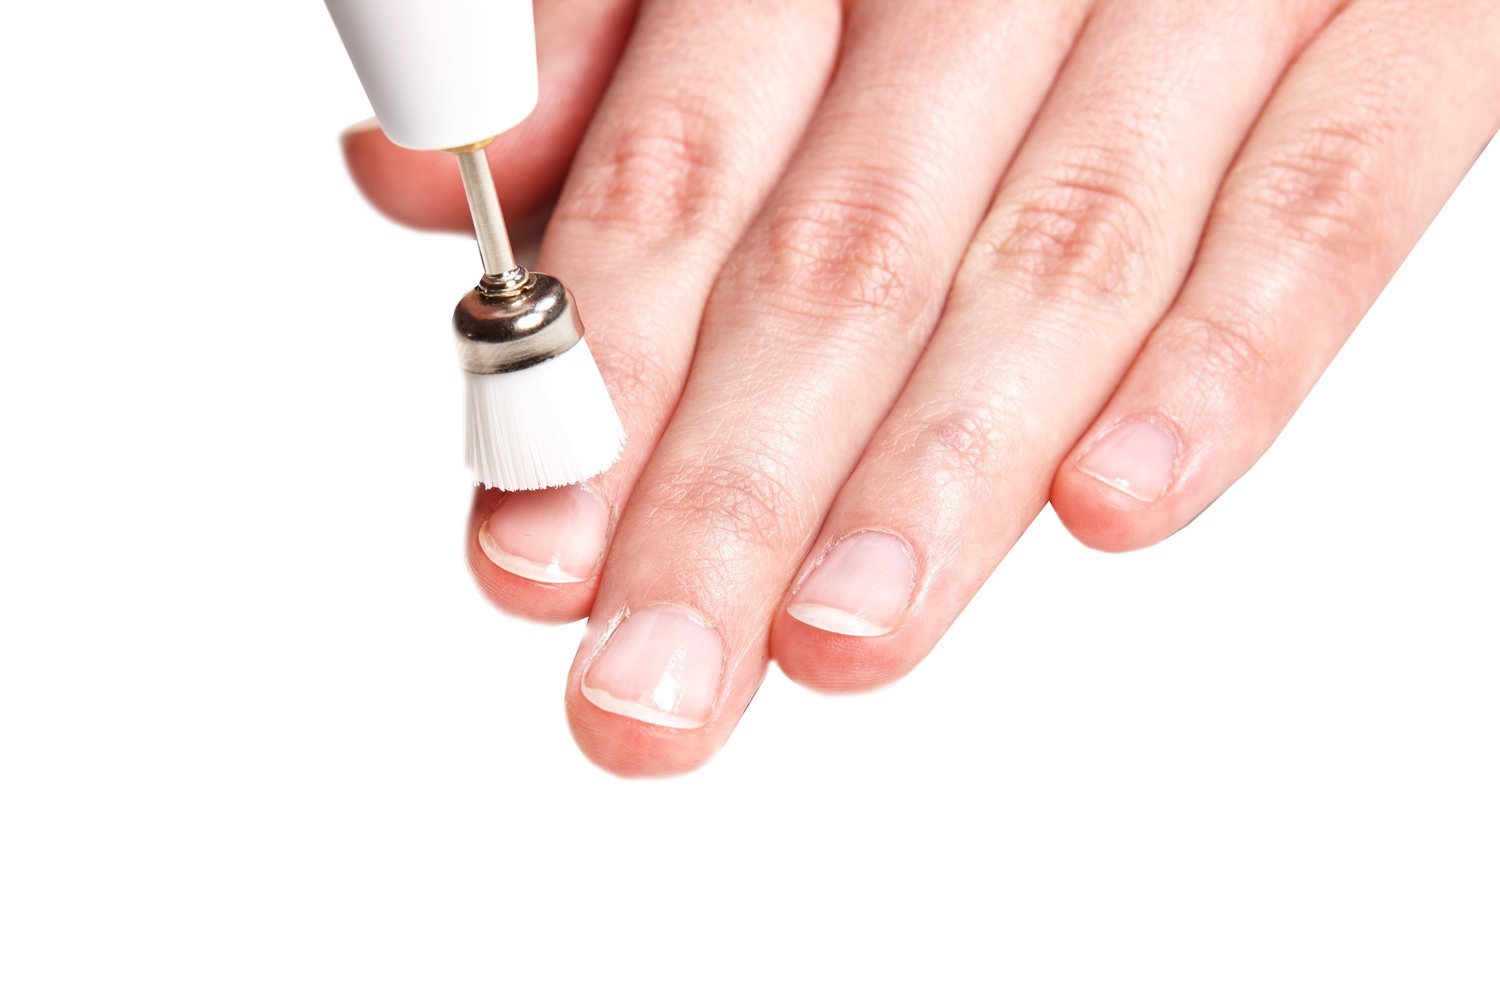 For nail design and skin and nail care: Promed The File 502